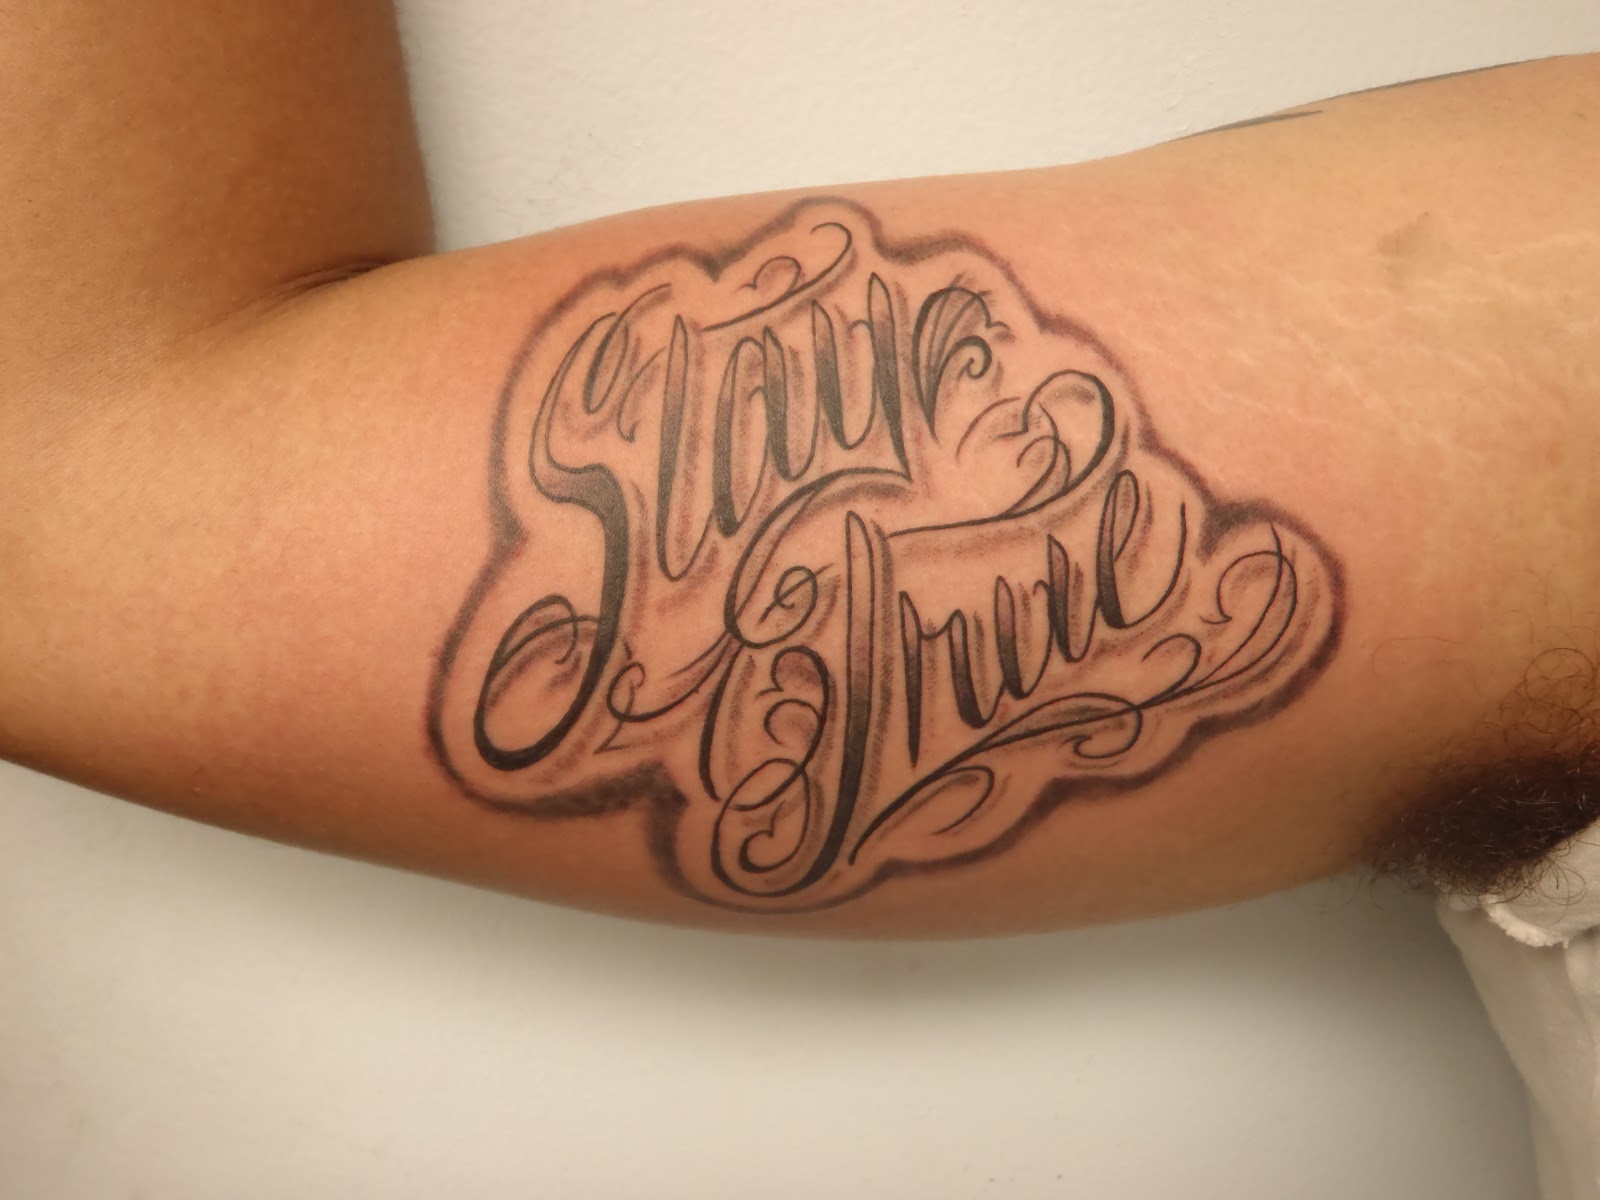 Shaded Letters Tattoo Designs - wide 4